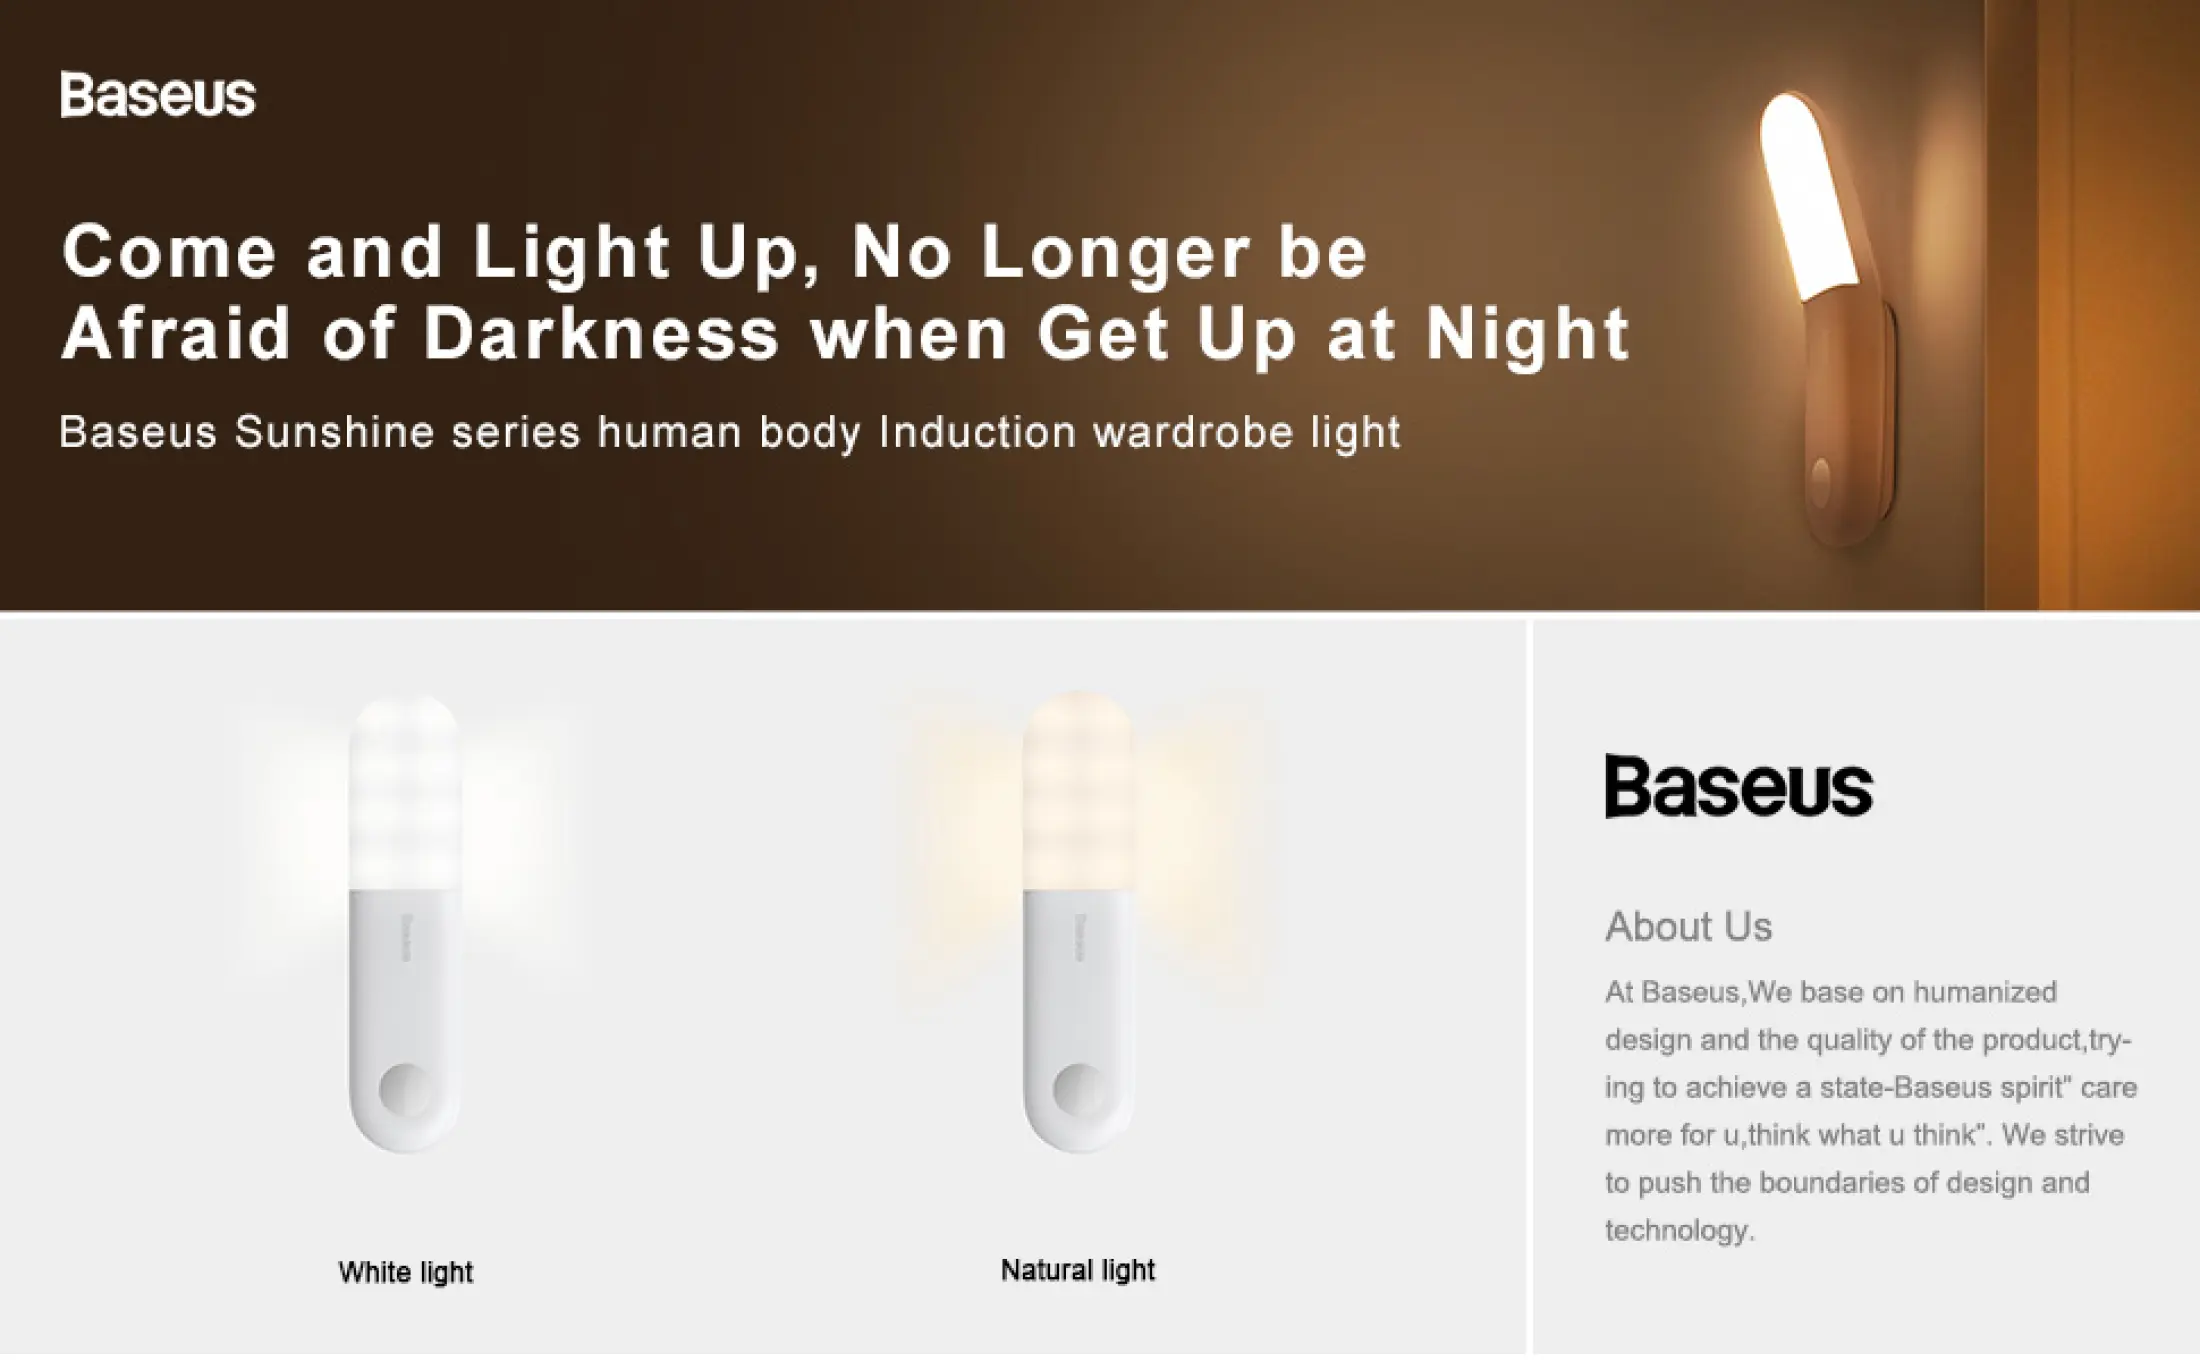 Baseus Sunshine Aisly Light Human Body Induction buy online best price in pakistan